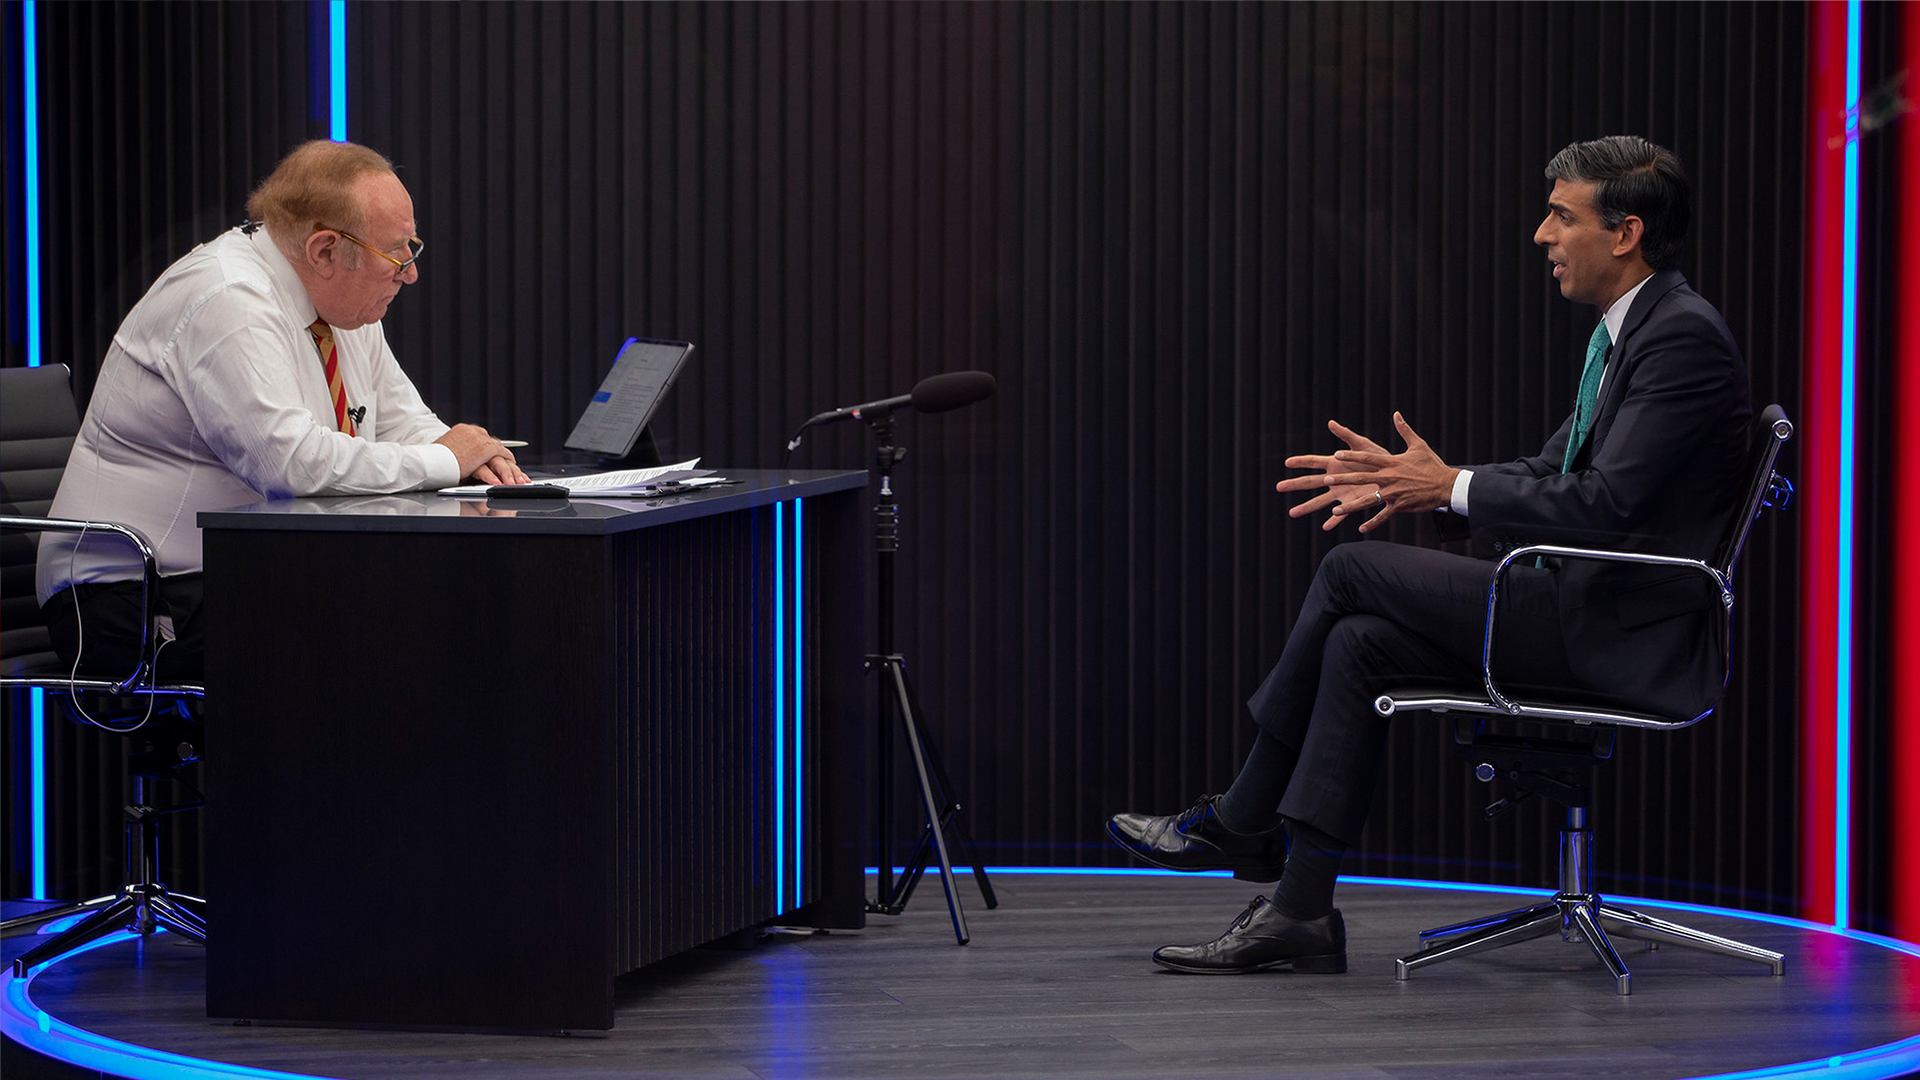 The Chancellor Rishi Sunak MP is interviewed by Andrew Neil on new TV news channel GB News, 16 June 2021. © HM Treasury [Flickr] / CC BY-NC-ND 2.0 DEED